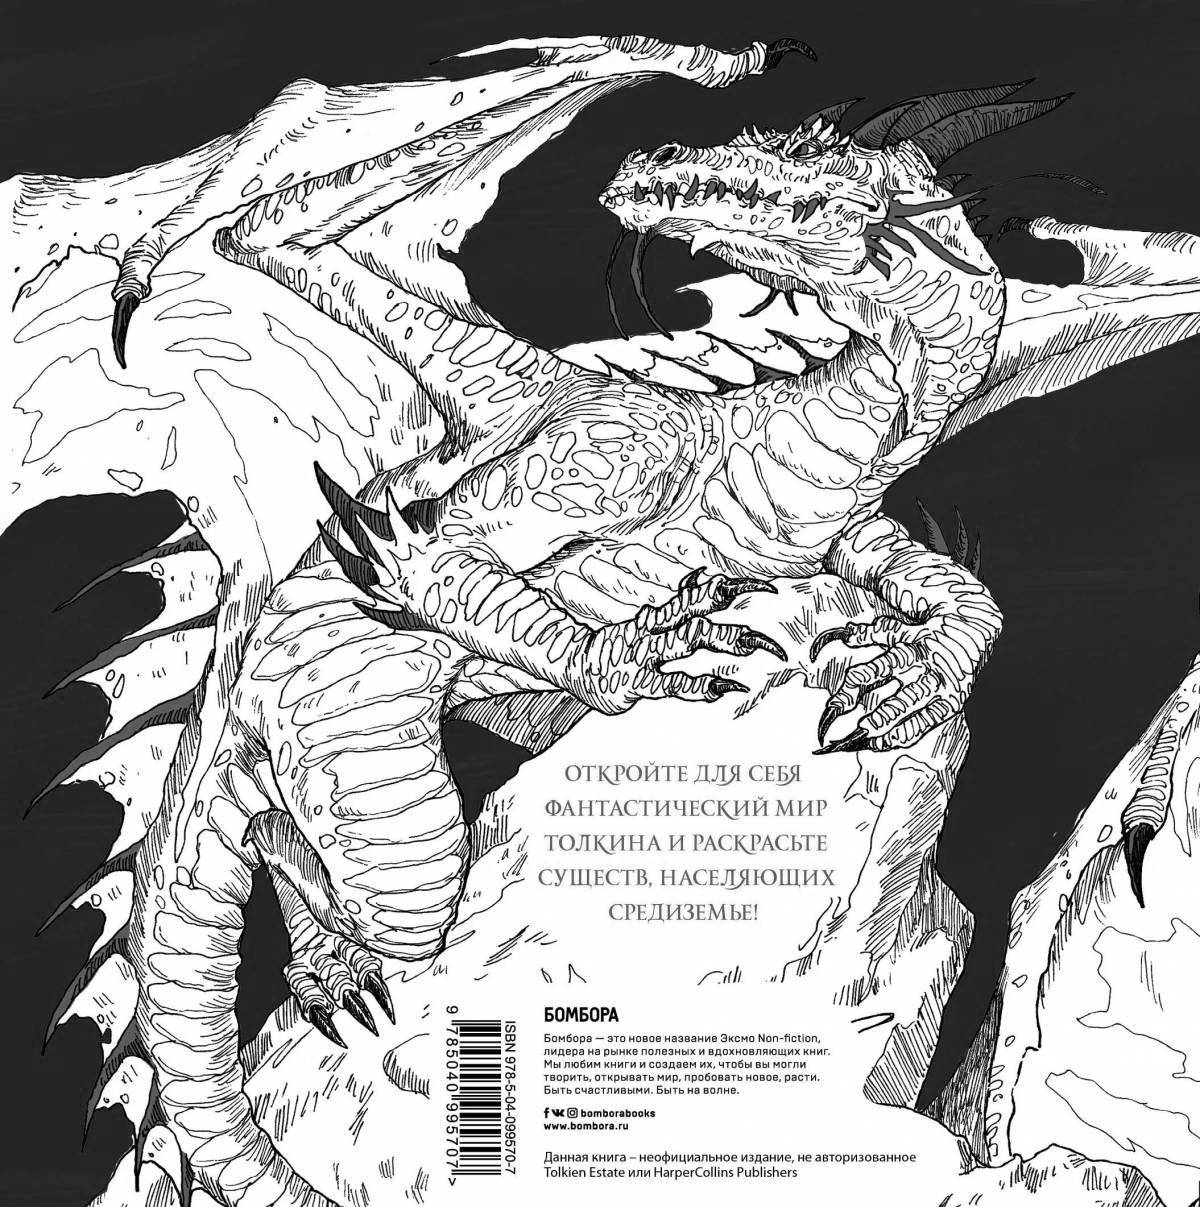 Radiant coloring page of tolkien world creatures